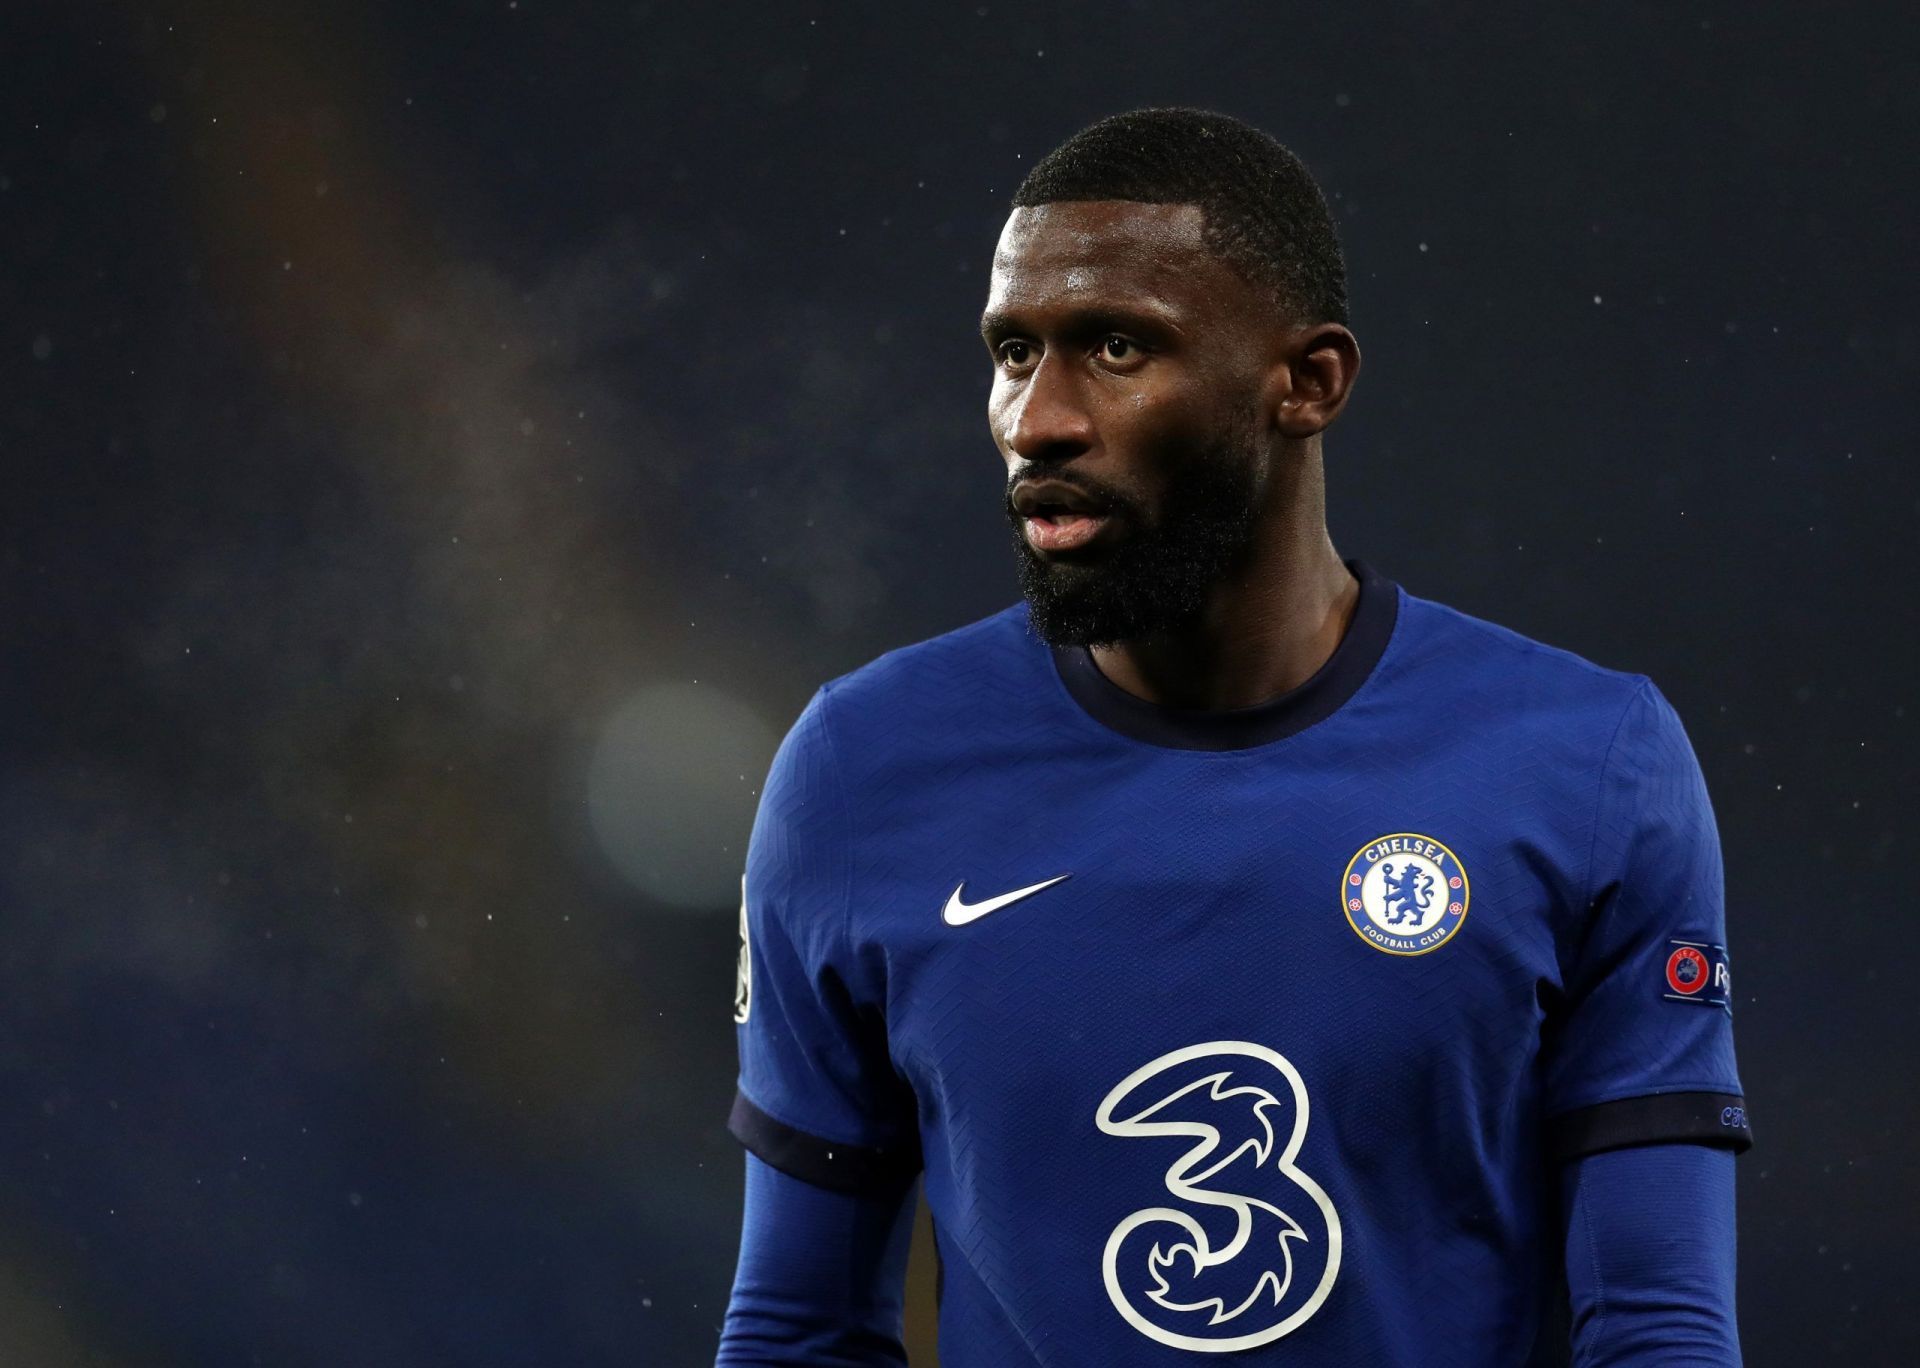 Antonio Rudiger in action for Chelsea in the Premier League.